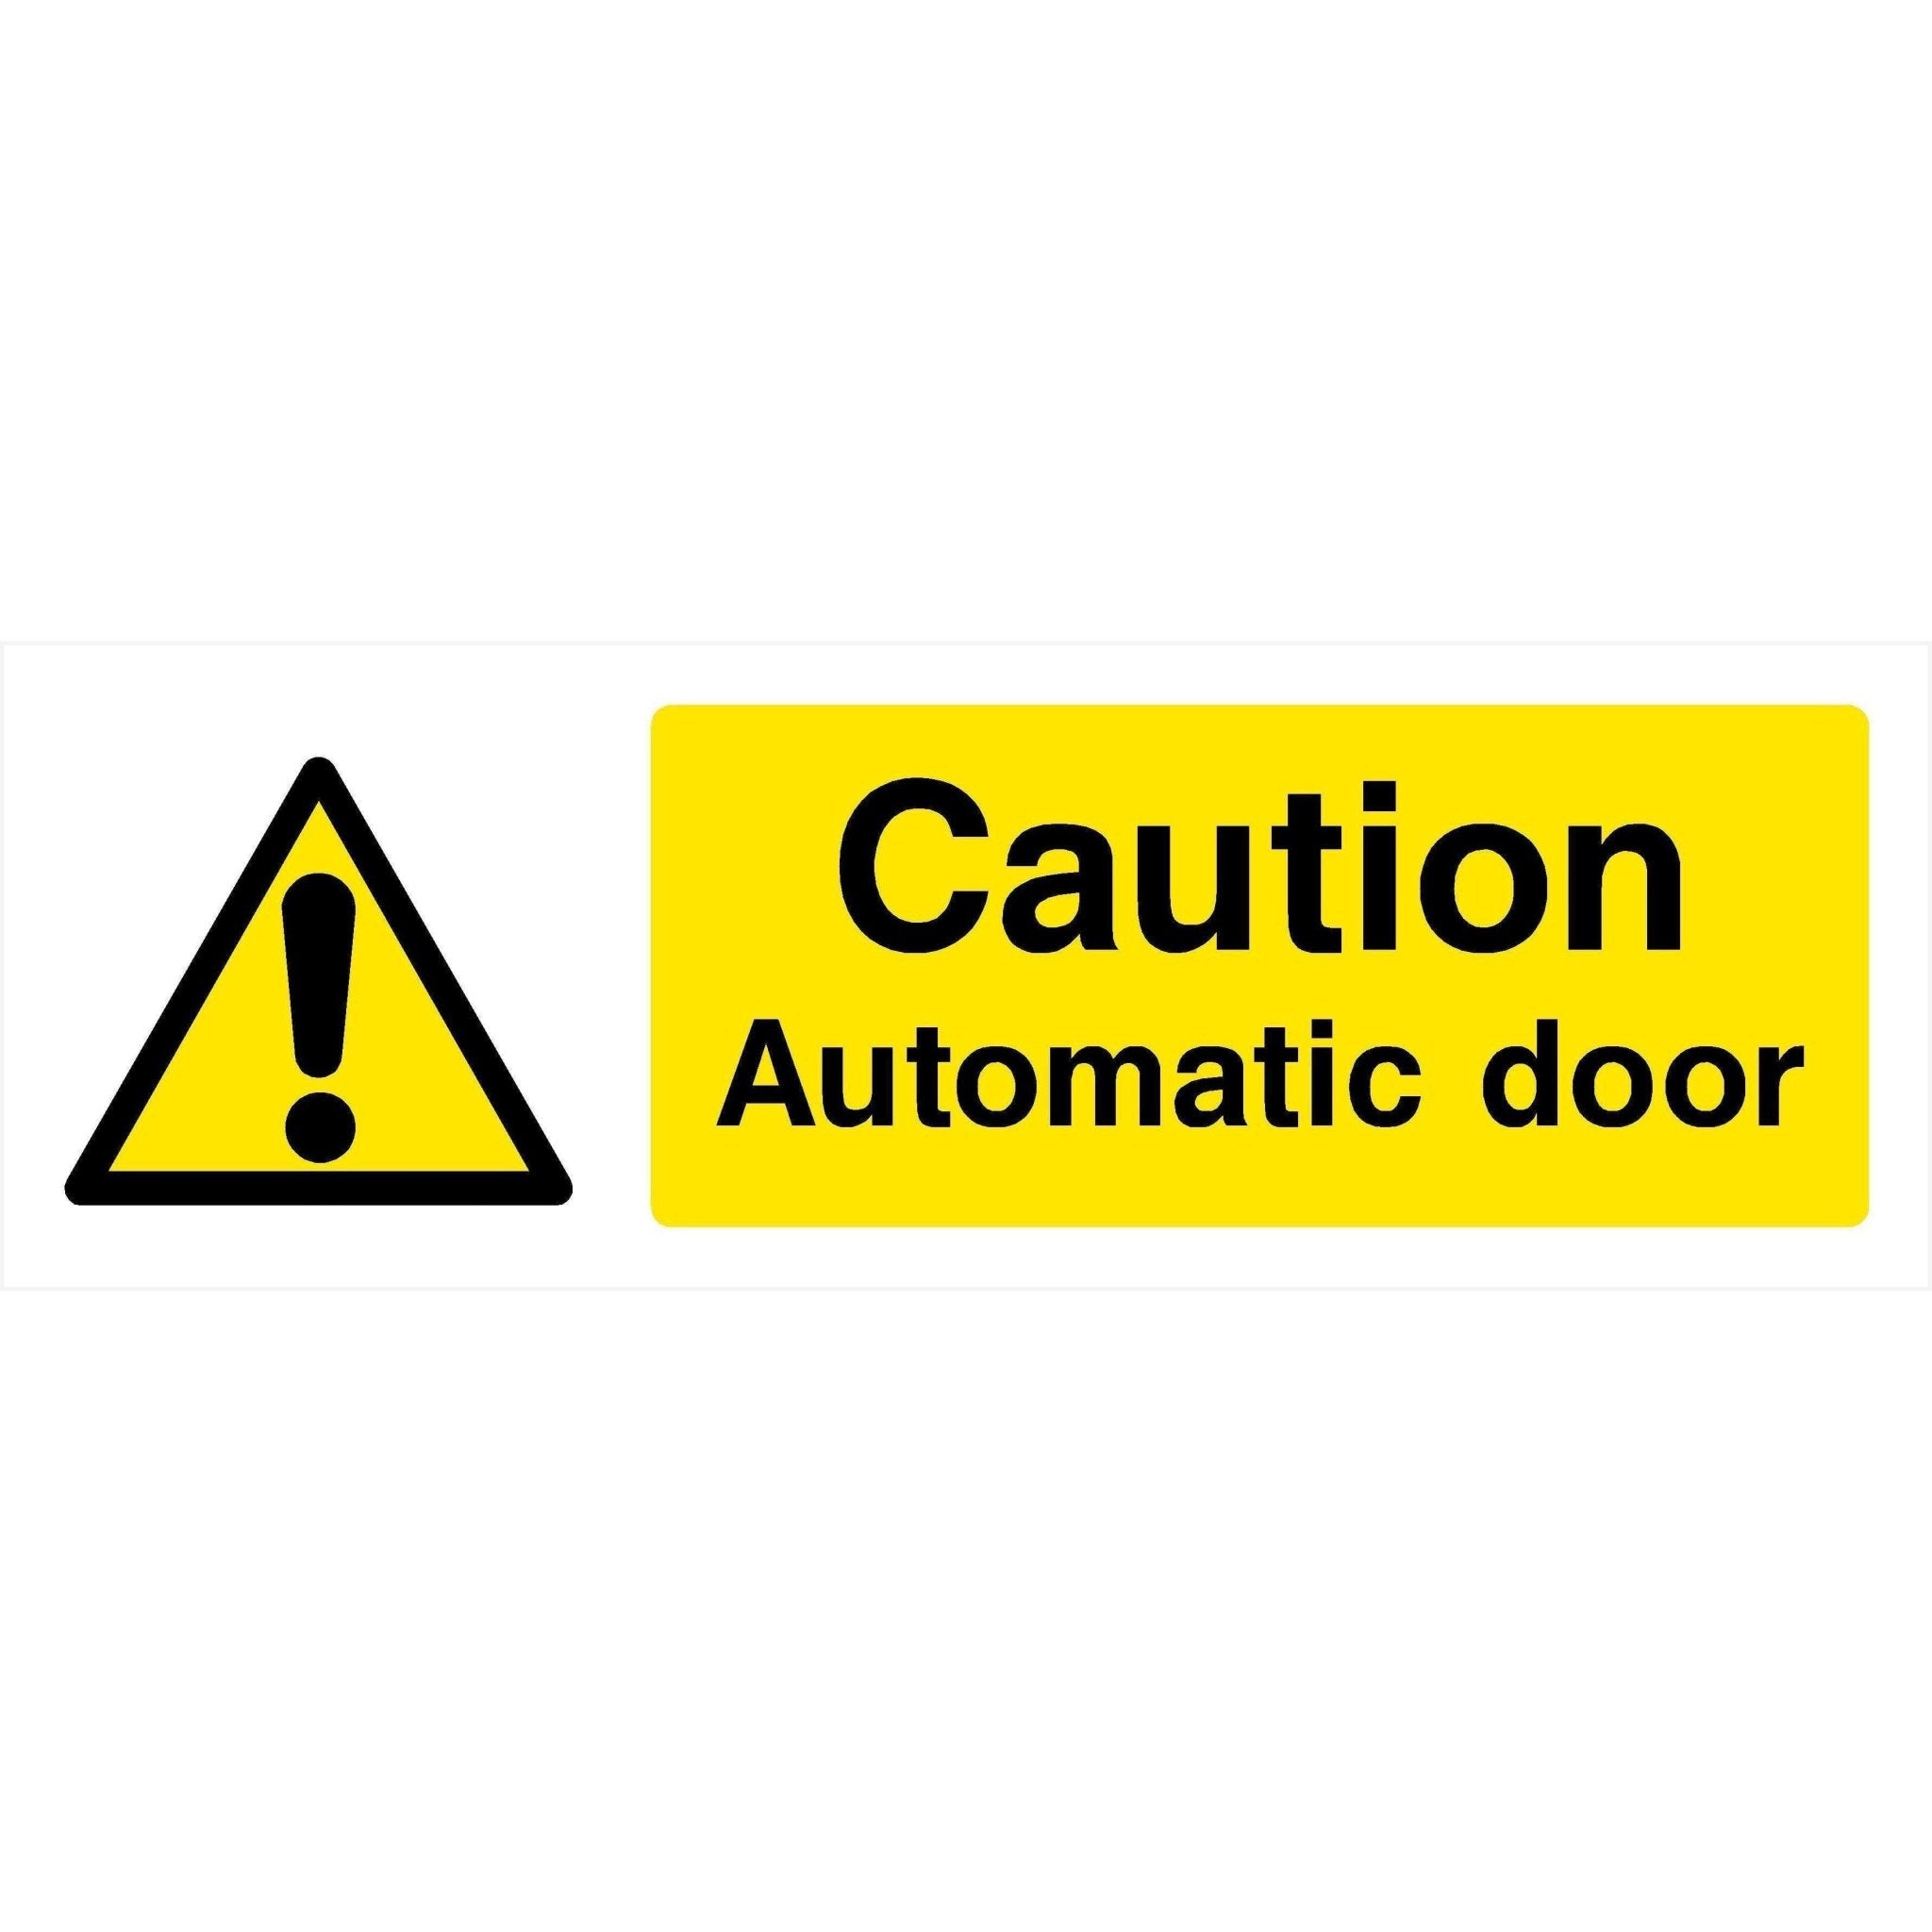 https://cdn.shopify.com/s/files/1/0044/4701/0919/products/automatic-door-sign-landscape-981339_2048x.jpg?v=1680274655